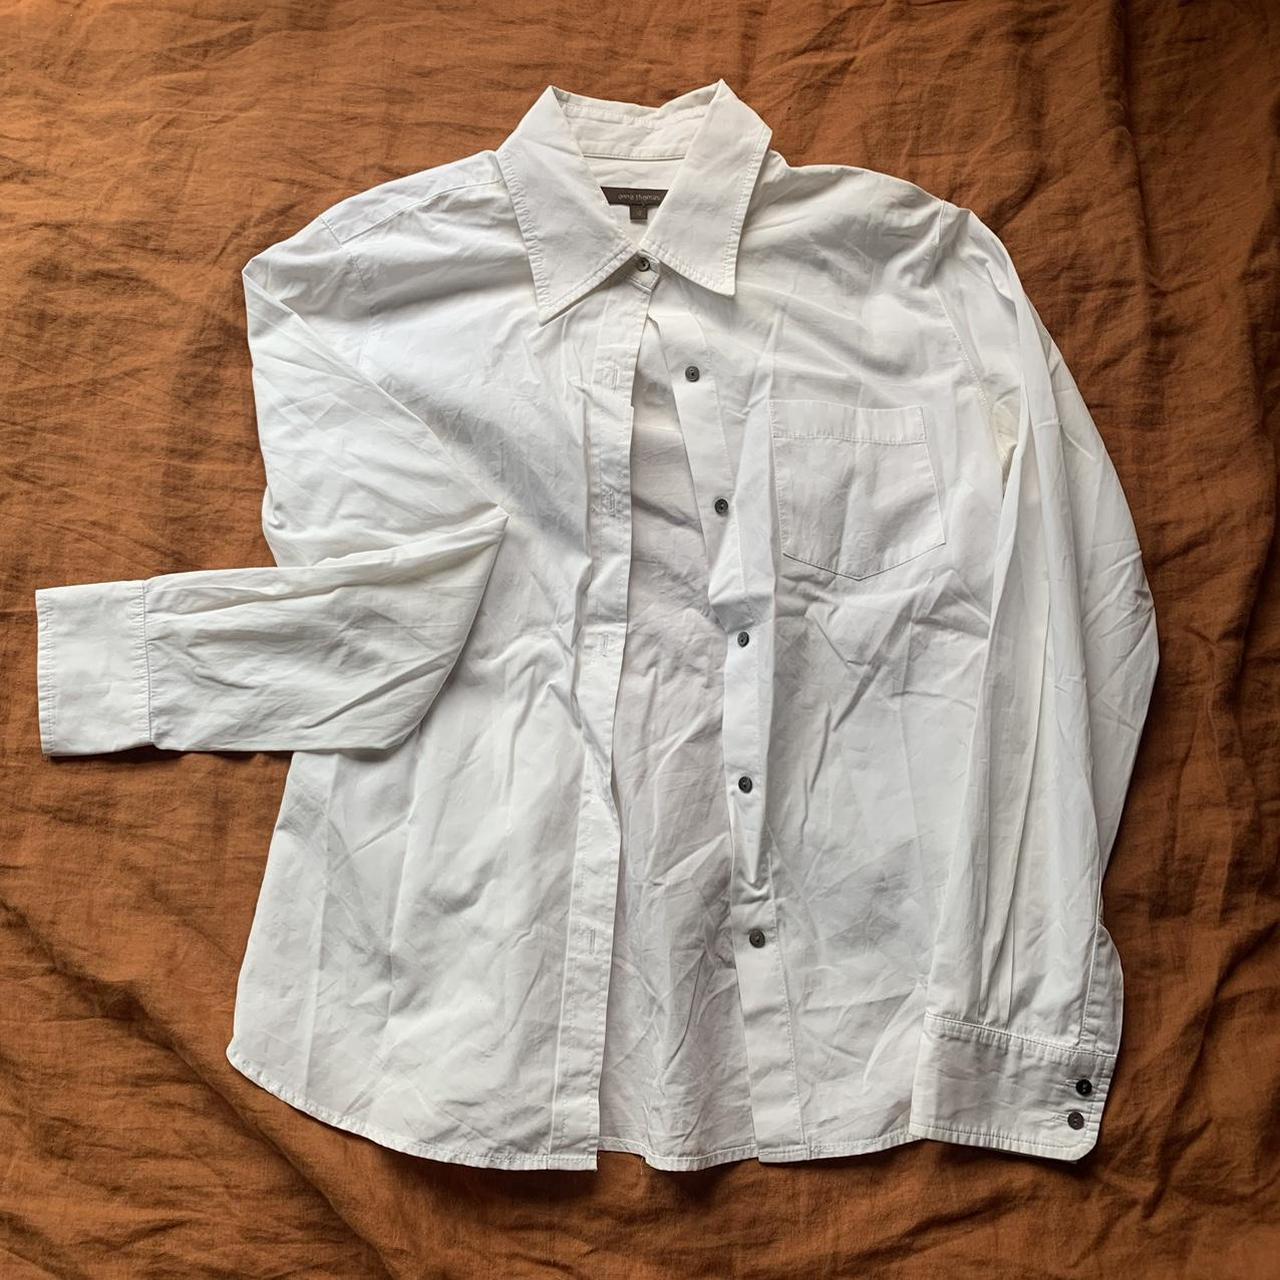 white work shirt with black buttons - Depop